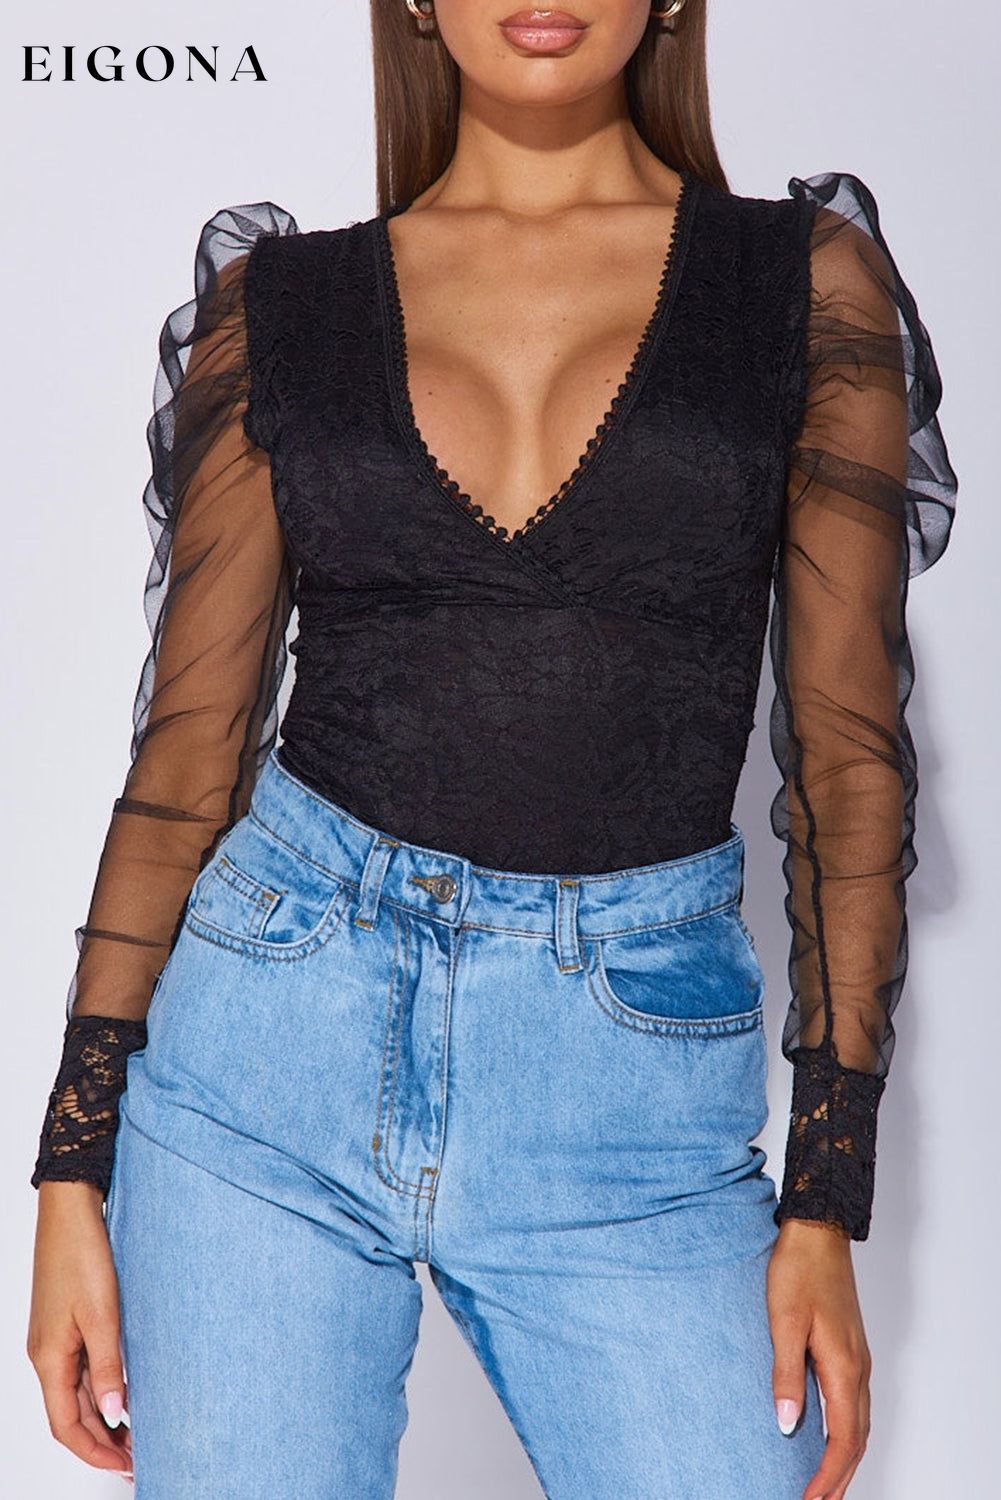 Black V Neck Lace Sheer Puff Sleeve Bodysuit blouse clothes DL Chic DL Exclusive puff sleeve shirt Season Spring top v neck shirt